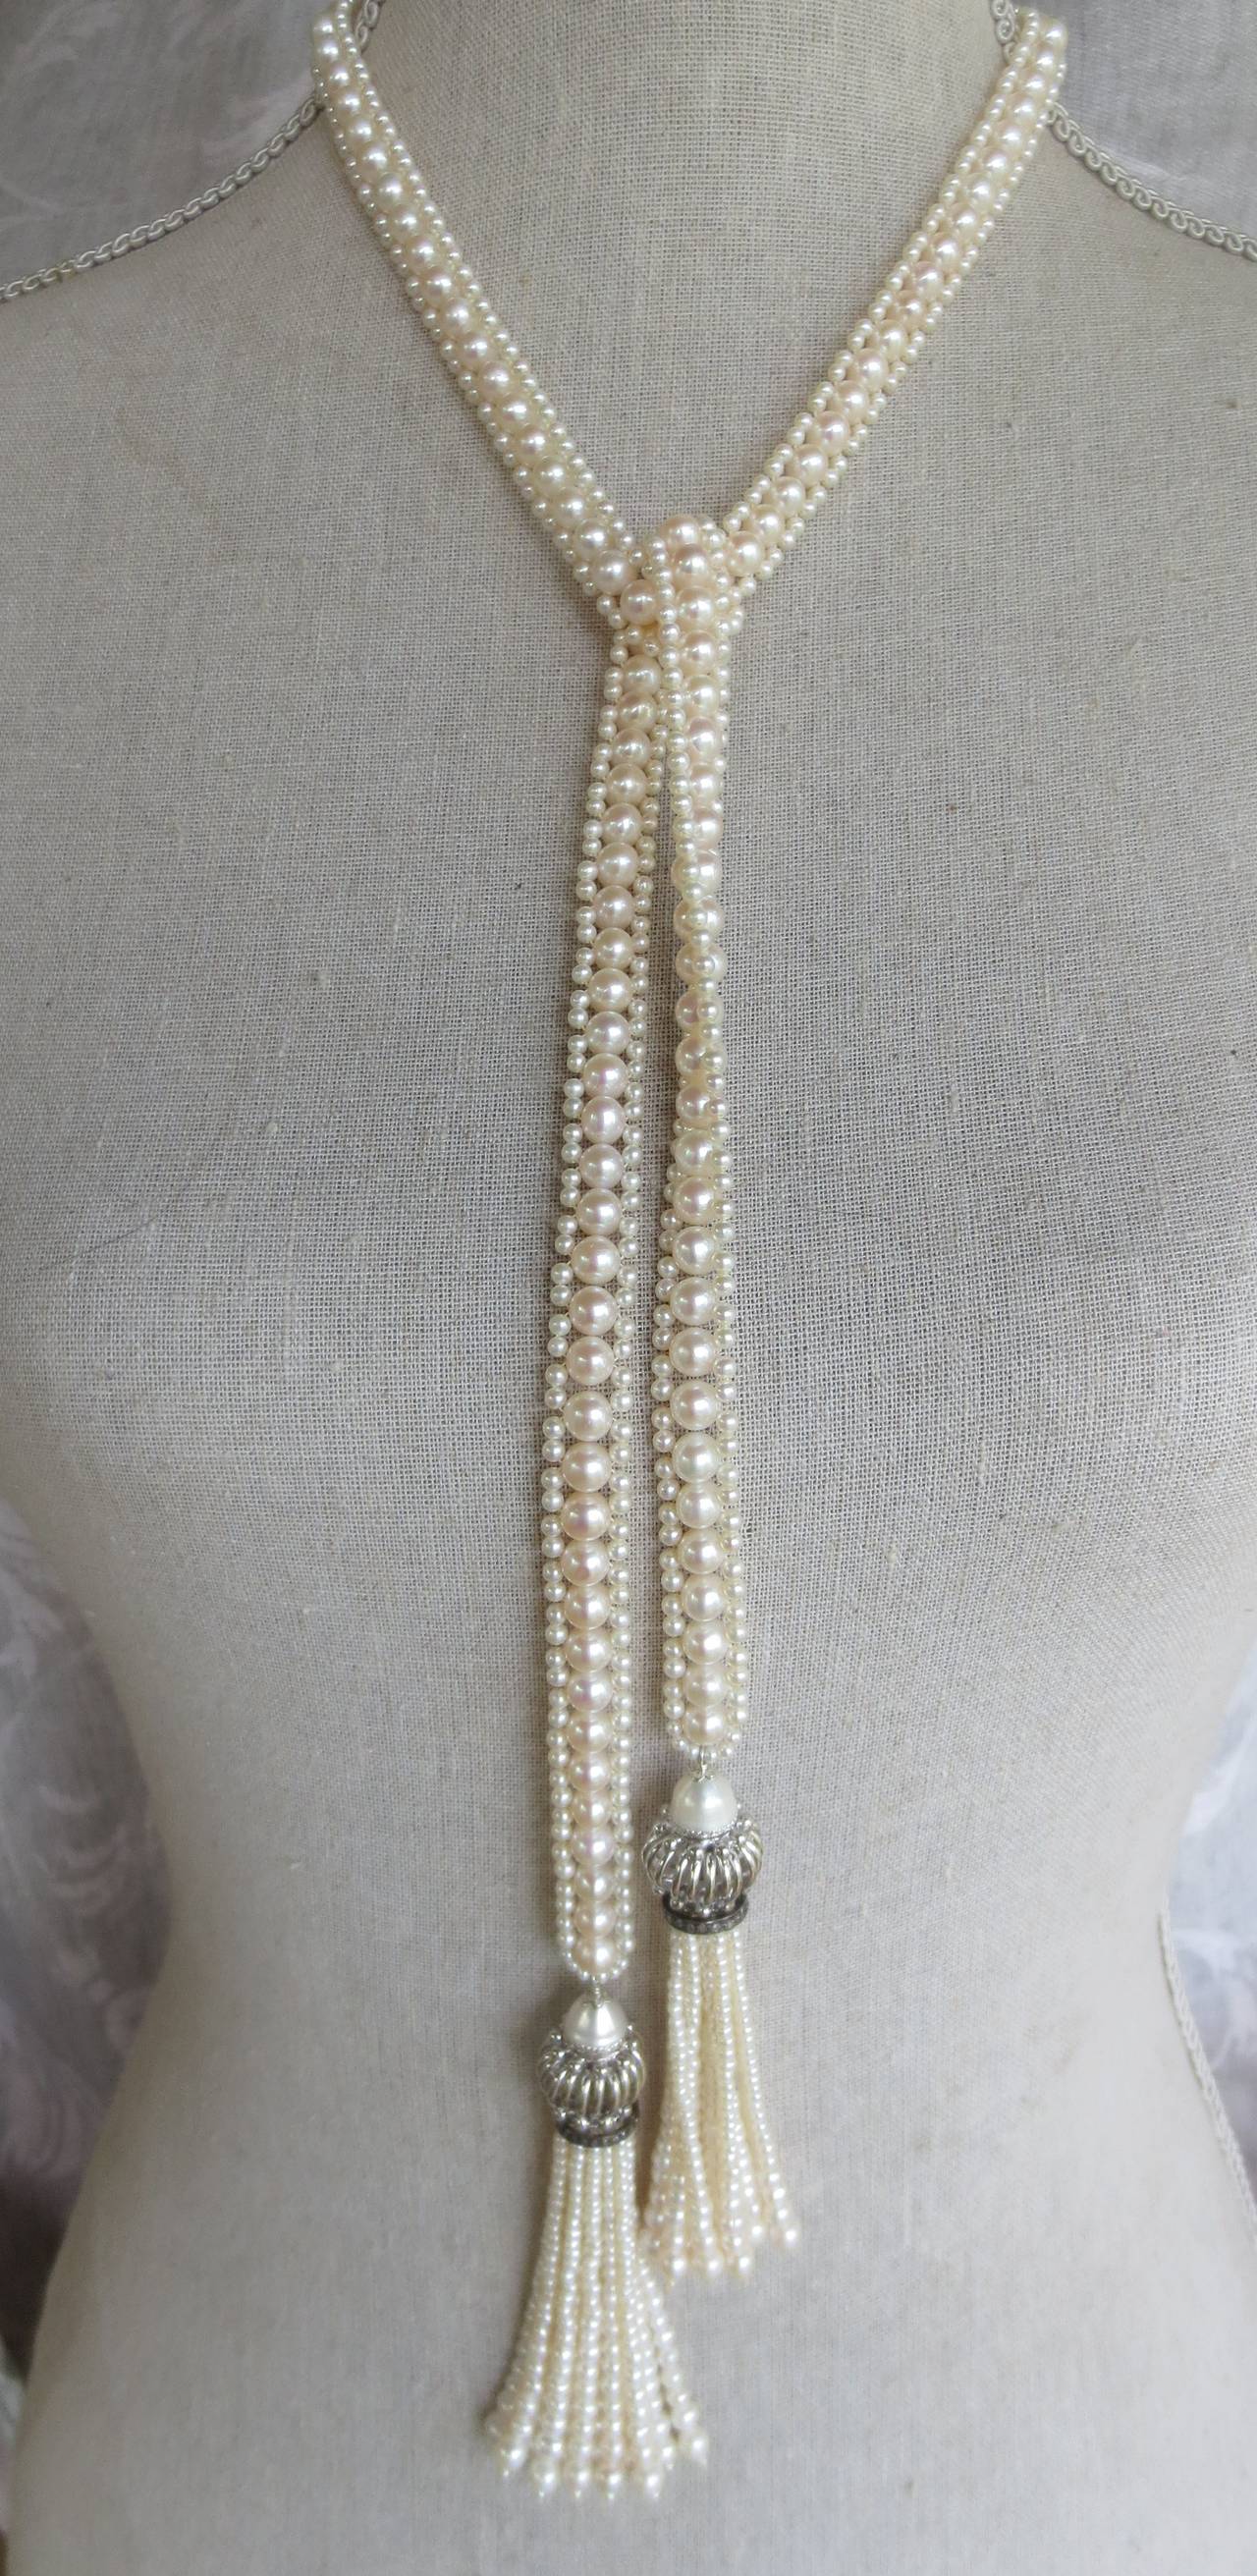 Artist White Pearl Sautoir Necklace with Rhodium Plated Silver Beads and Pearl Tassels 